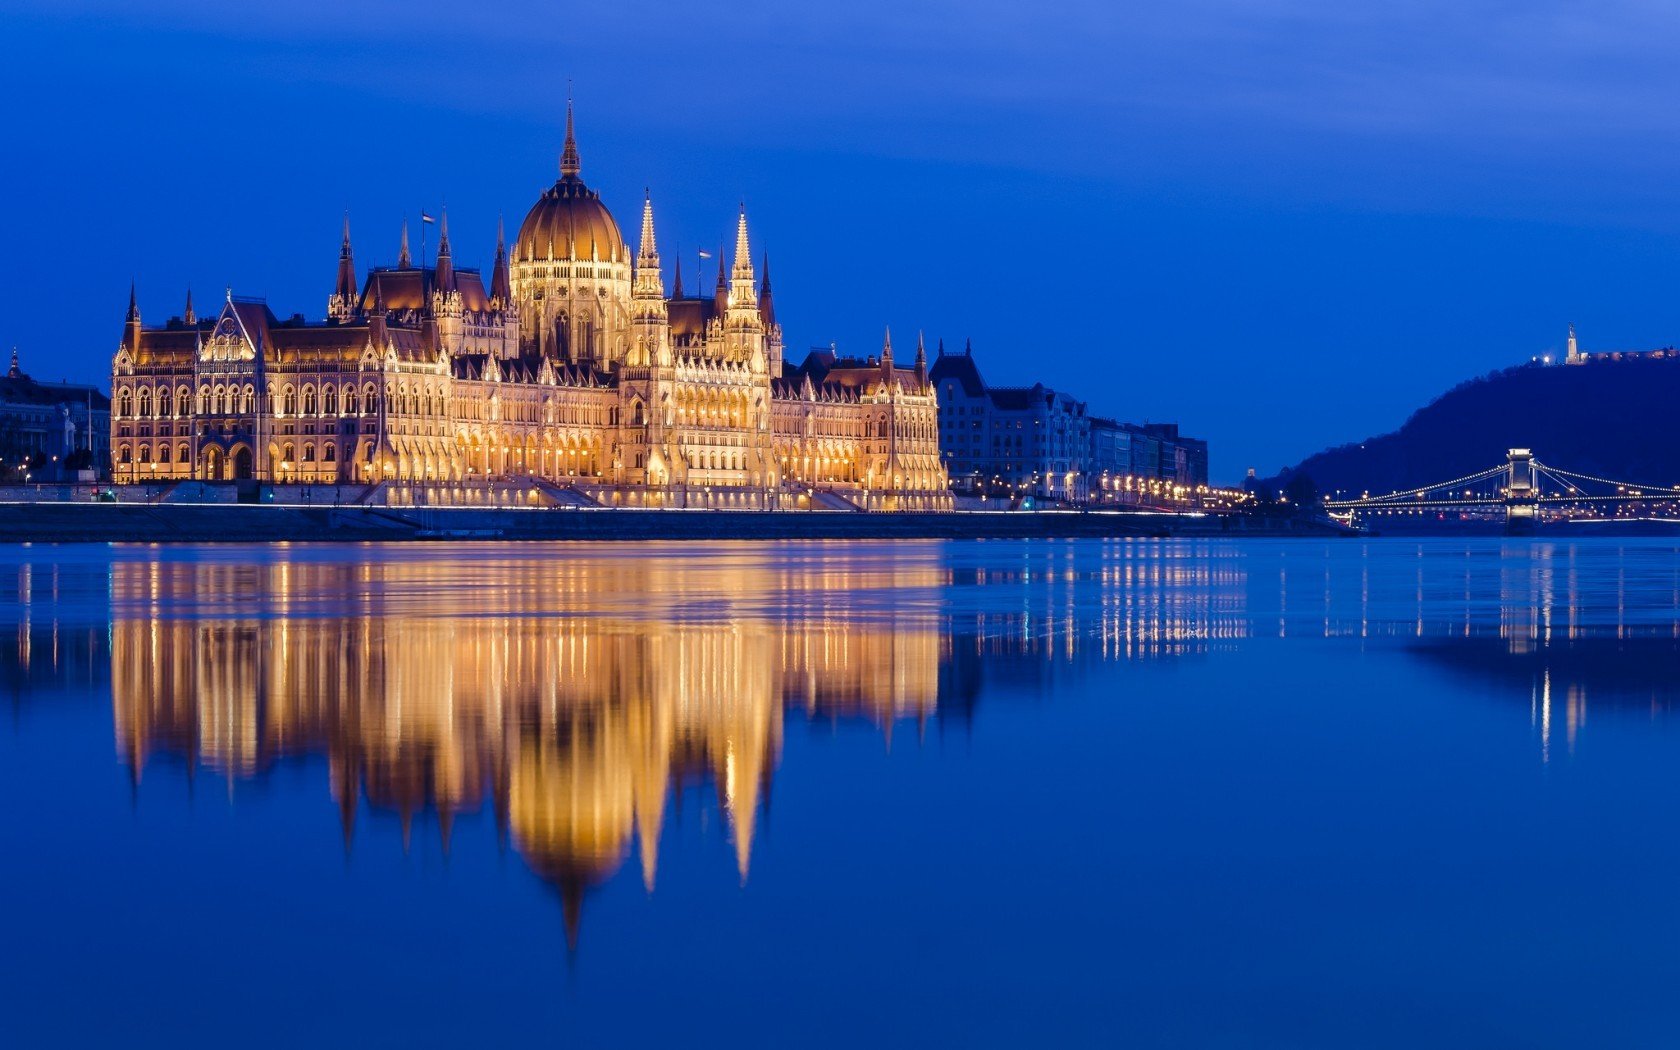 architecture, Budapest, Hungary, Old building, Capital, Cityscape, City, River, Water, Hungarian Parliament Building, Bridge, Old bridge, Chain Bridge, Reflection, Evening, Lights, Hills, Gothic architecture Wallpaper